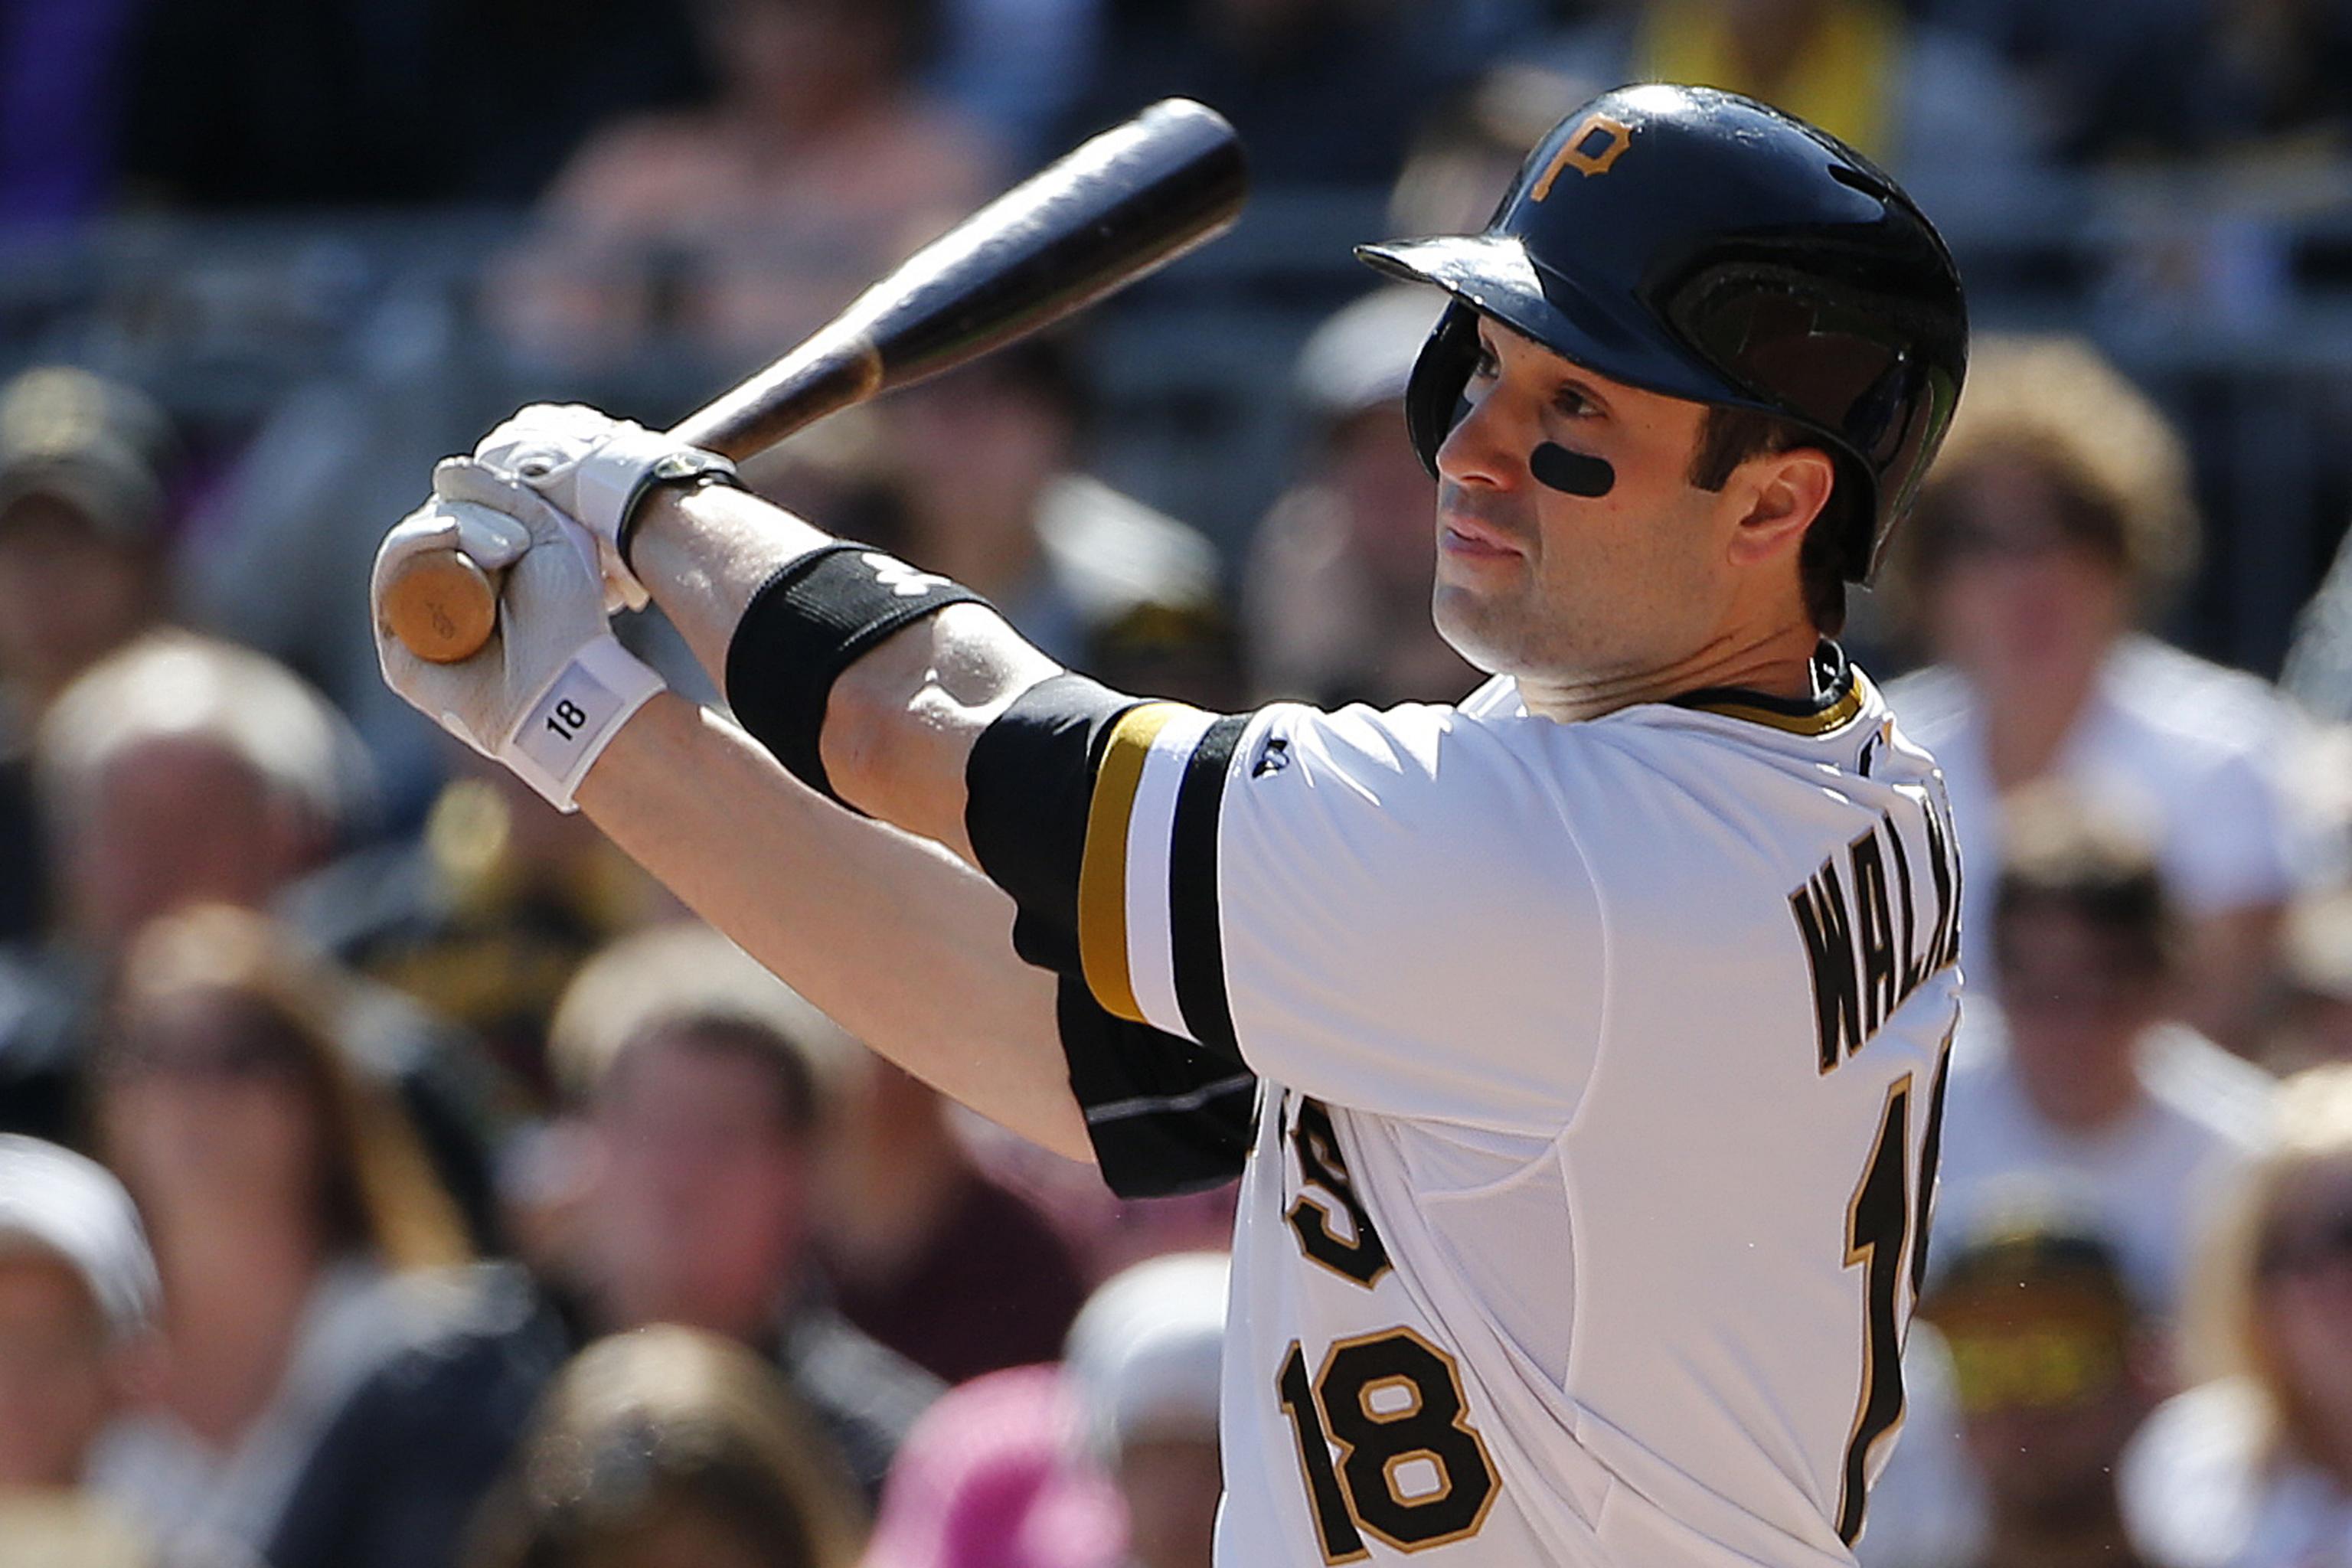 Neil Walker: 5 Fast Facts You Need to Know